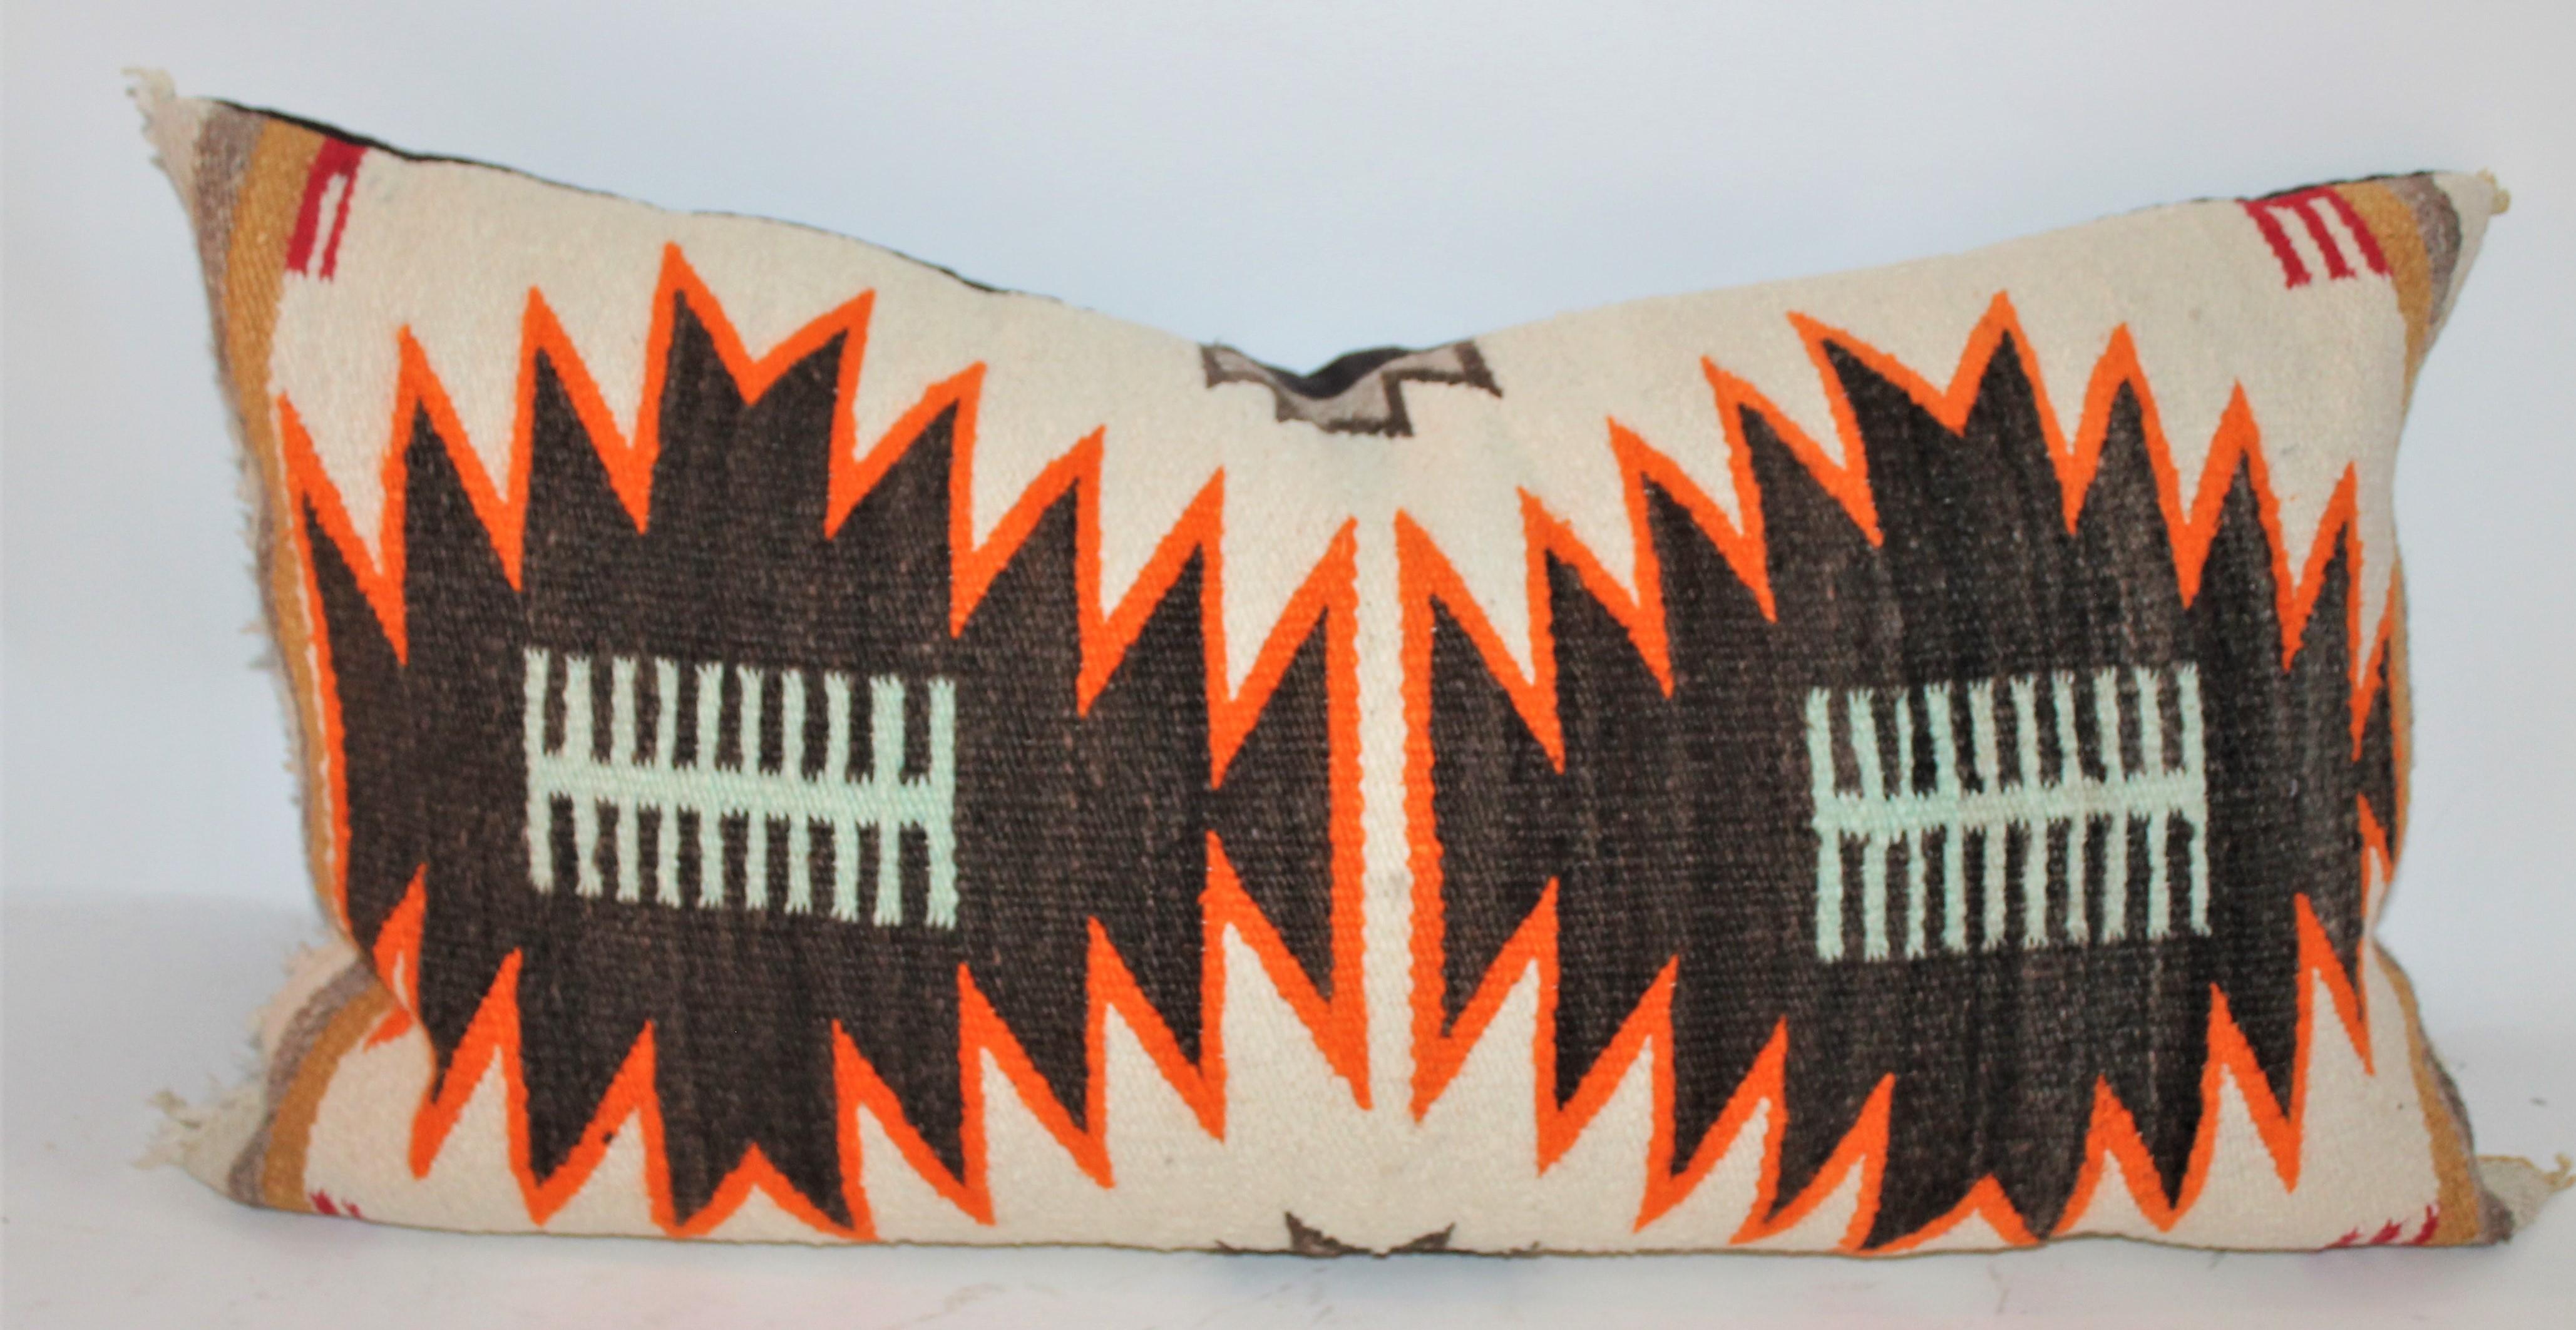 Two different Navajo Indian weaving bolster pillows in fine condition with cotton linen backings. The inserts are down and feather fill.

34 x 17 - larger pillow
34 x 16 - smaller pillow.